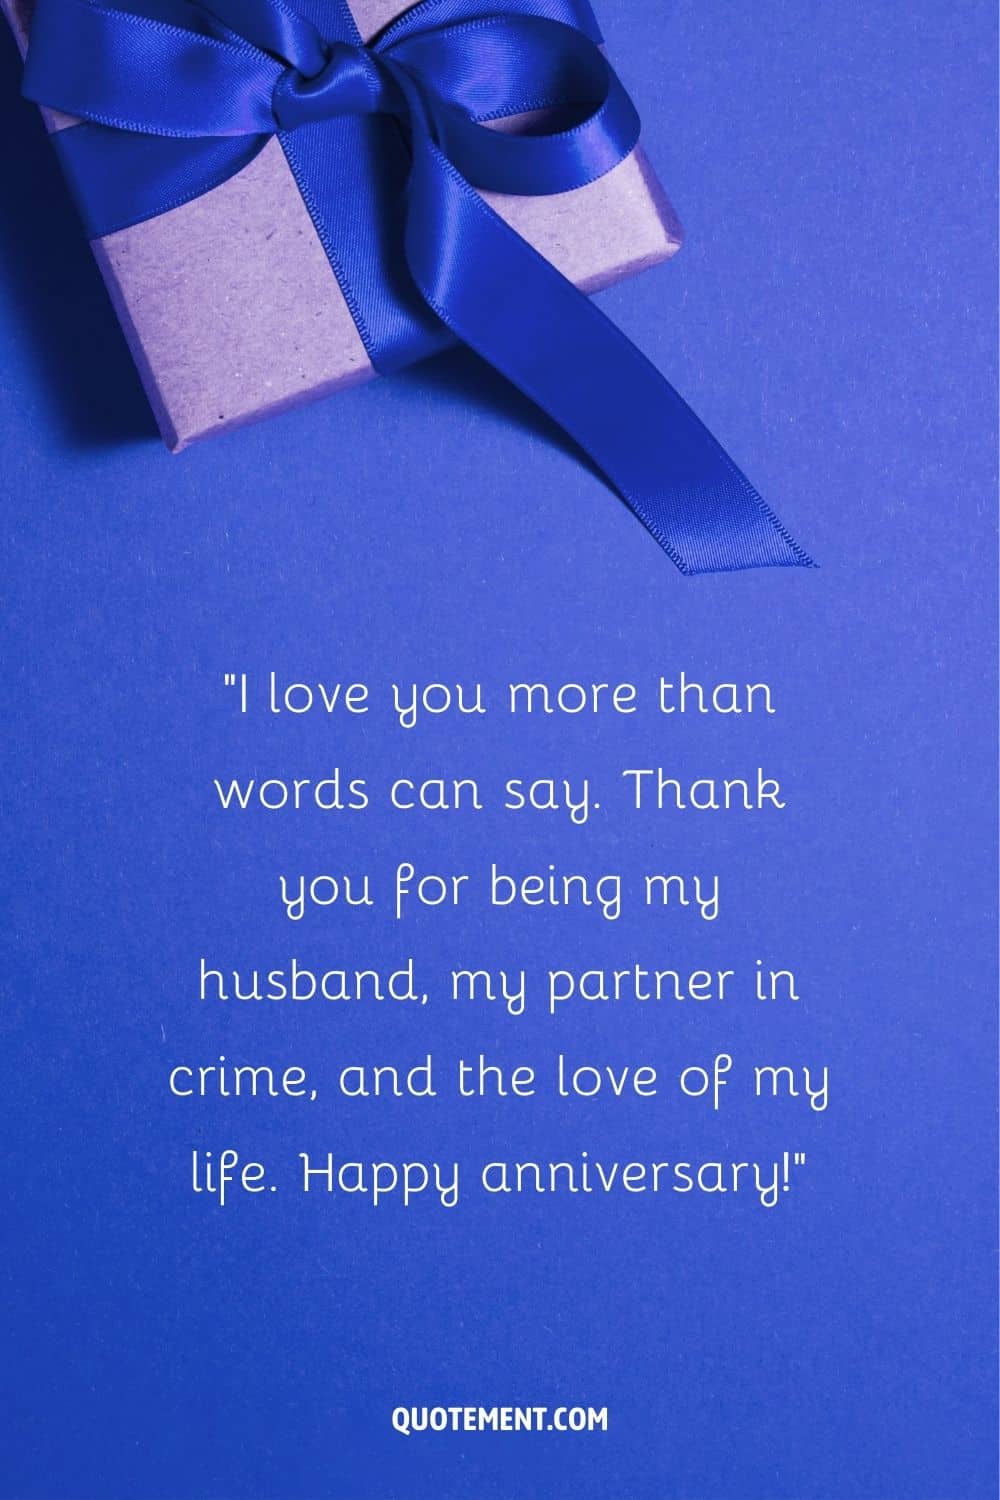 Thank you for being my husband, my partner in crime, and the love of my life.